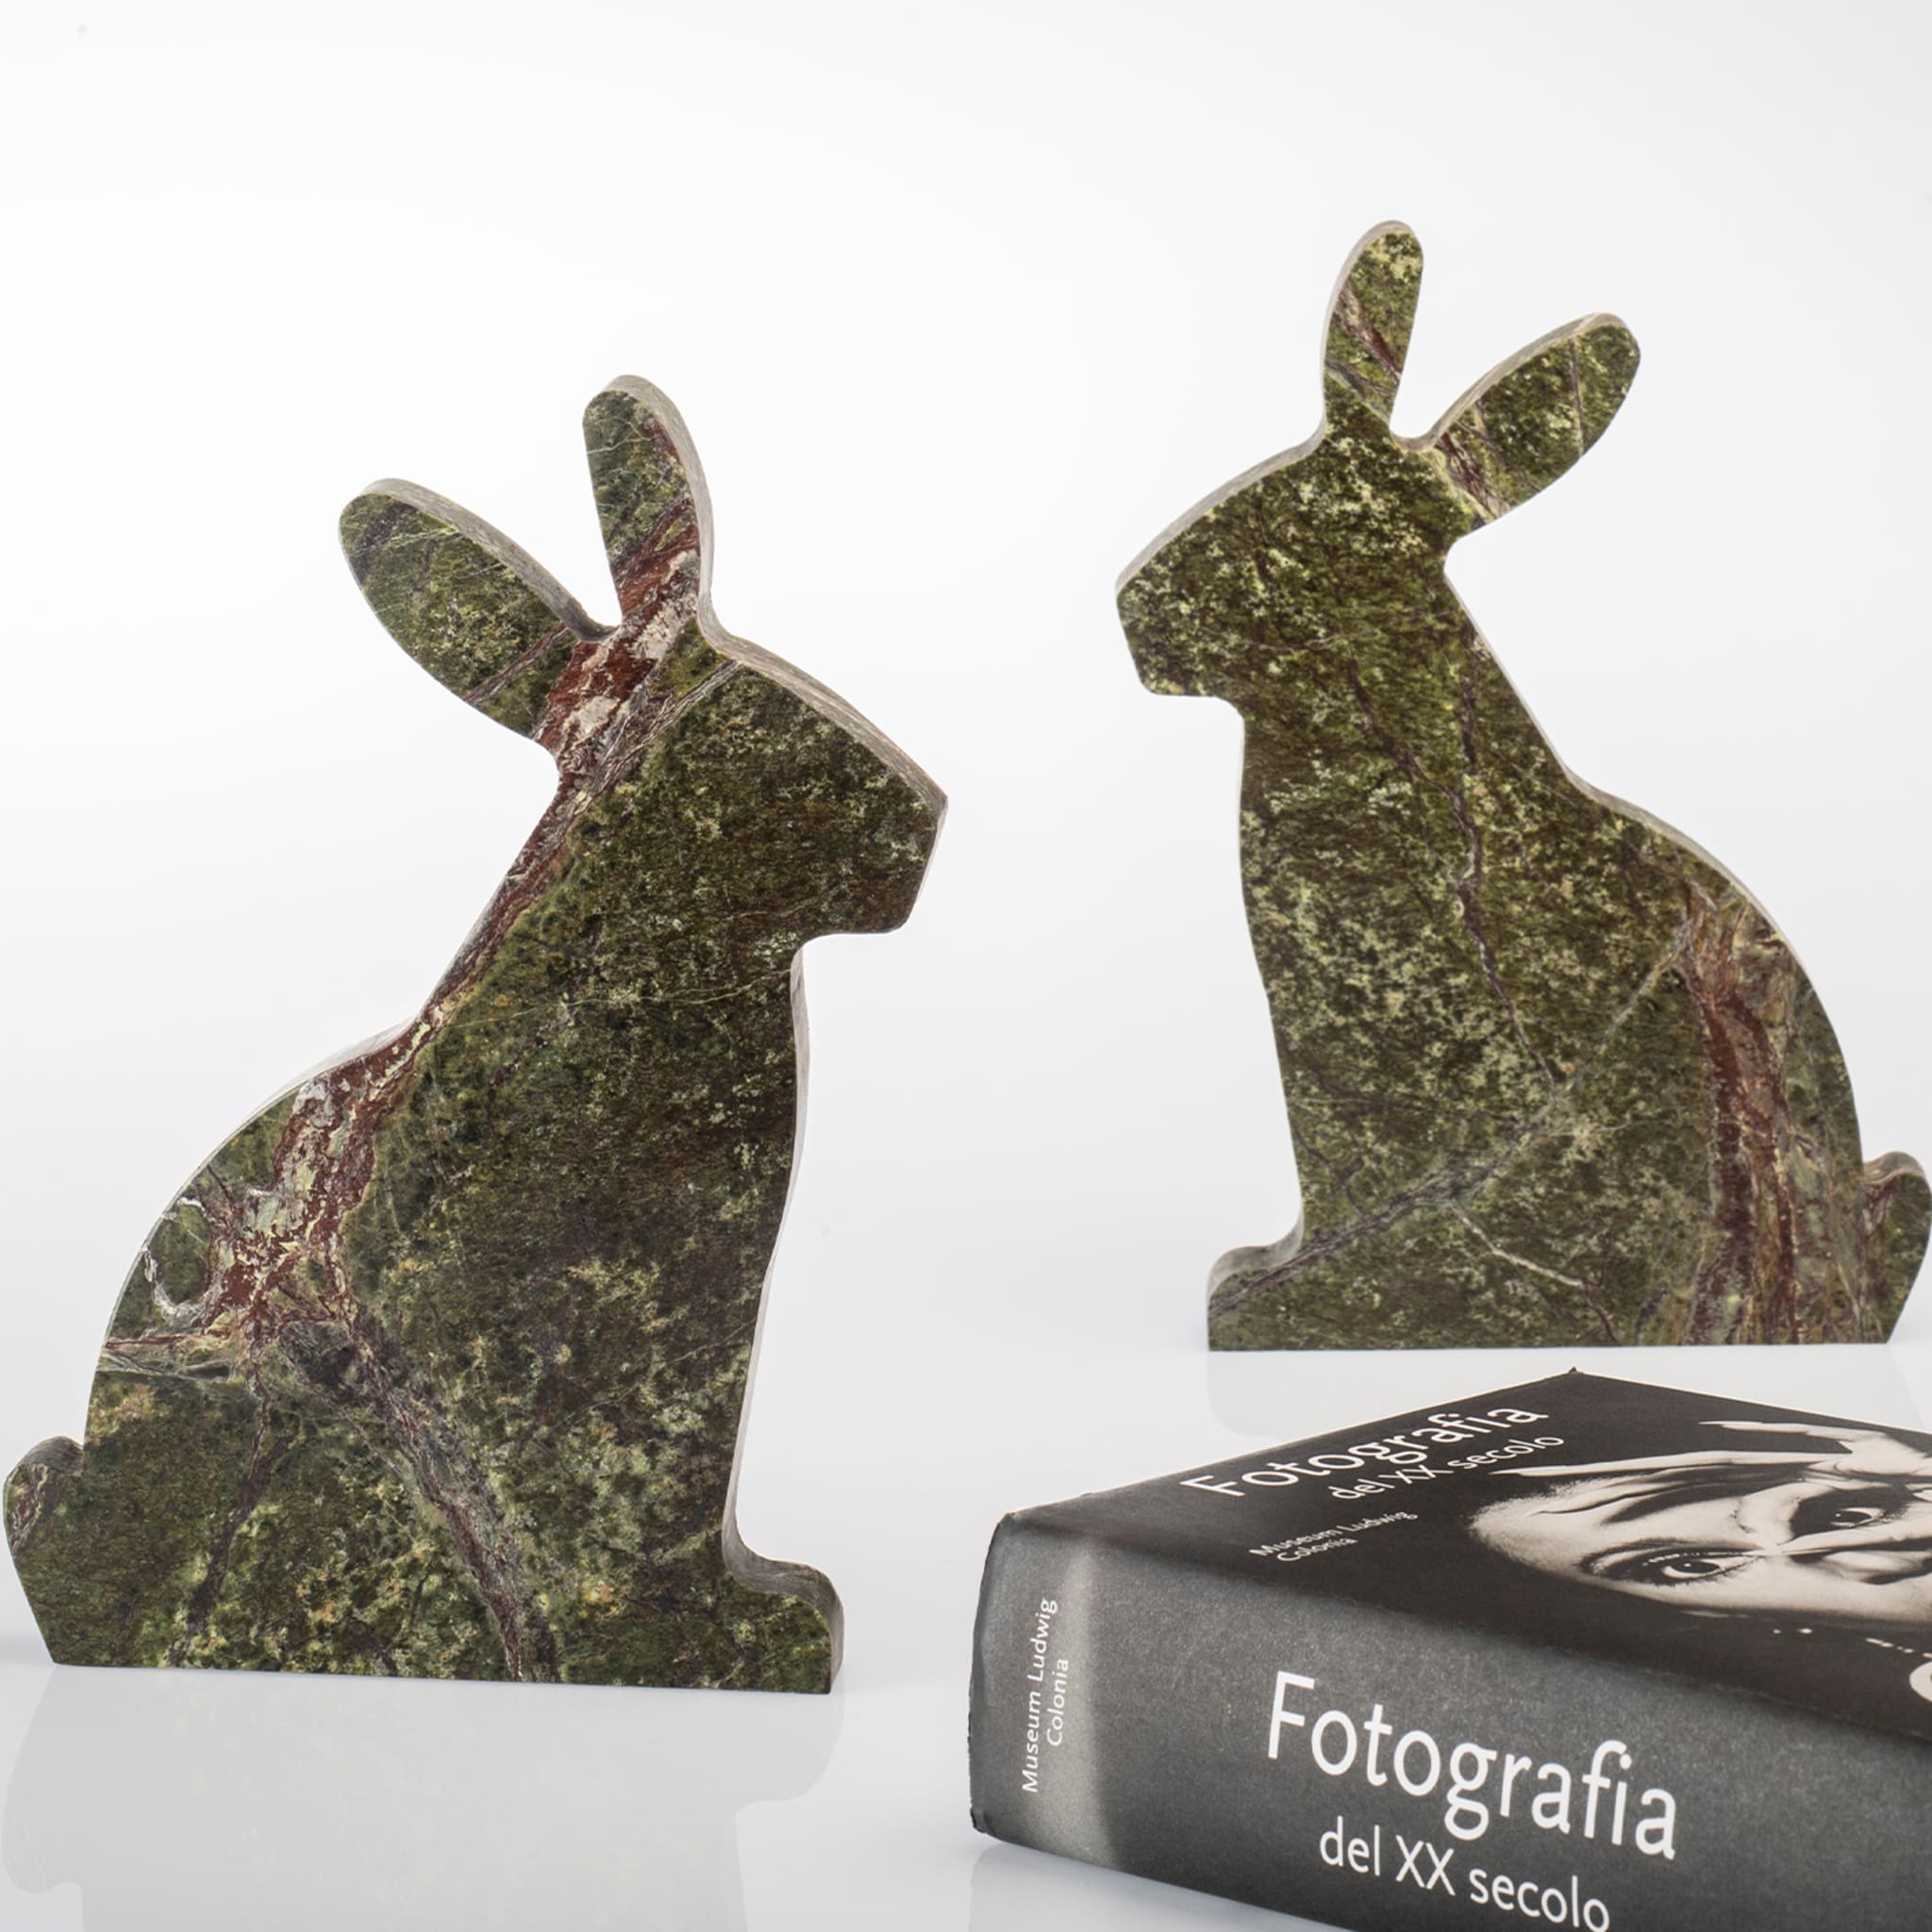 Bunny Picasso Green Left Bookend by Alessandra Grasso - Alternative view 2